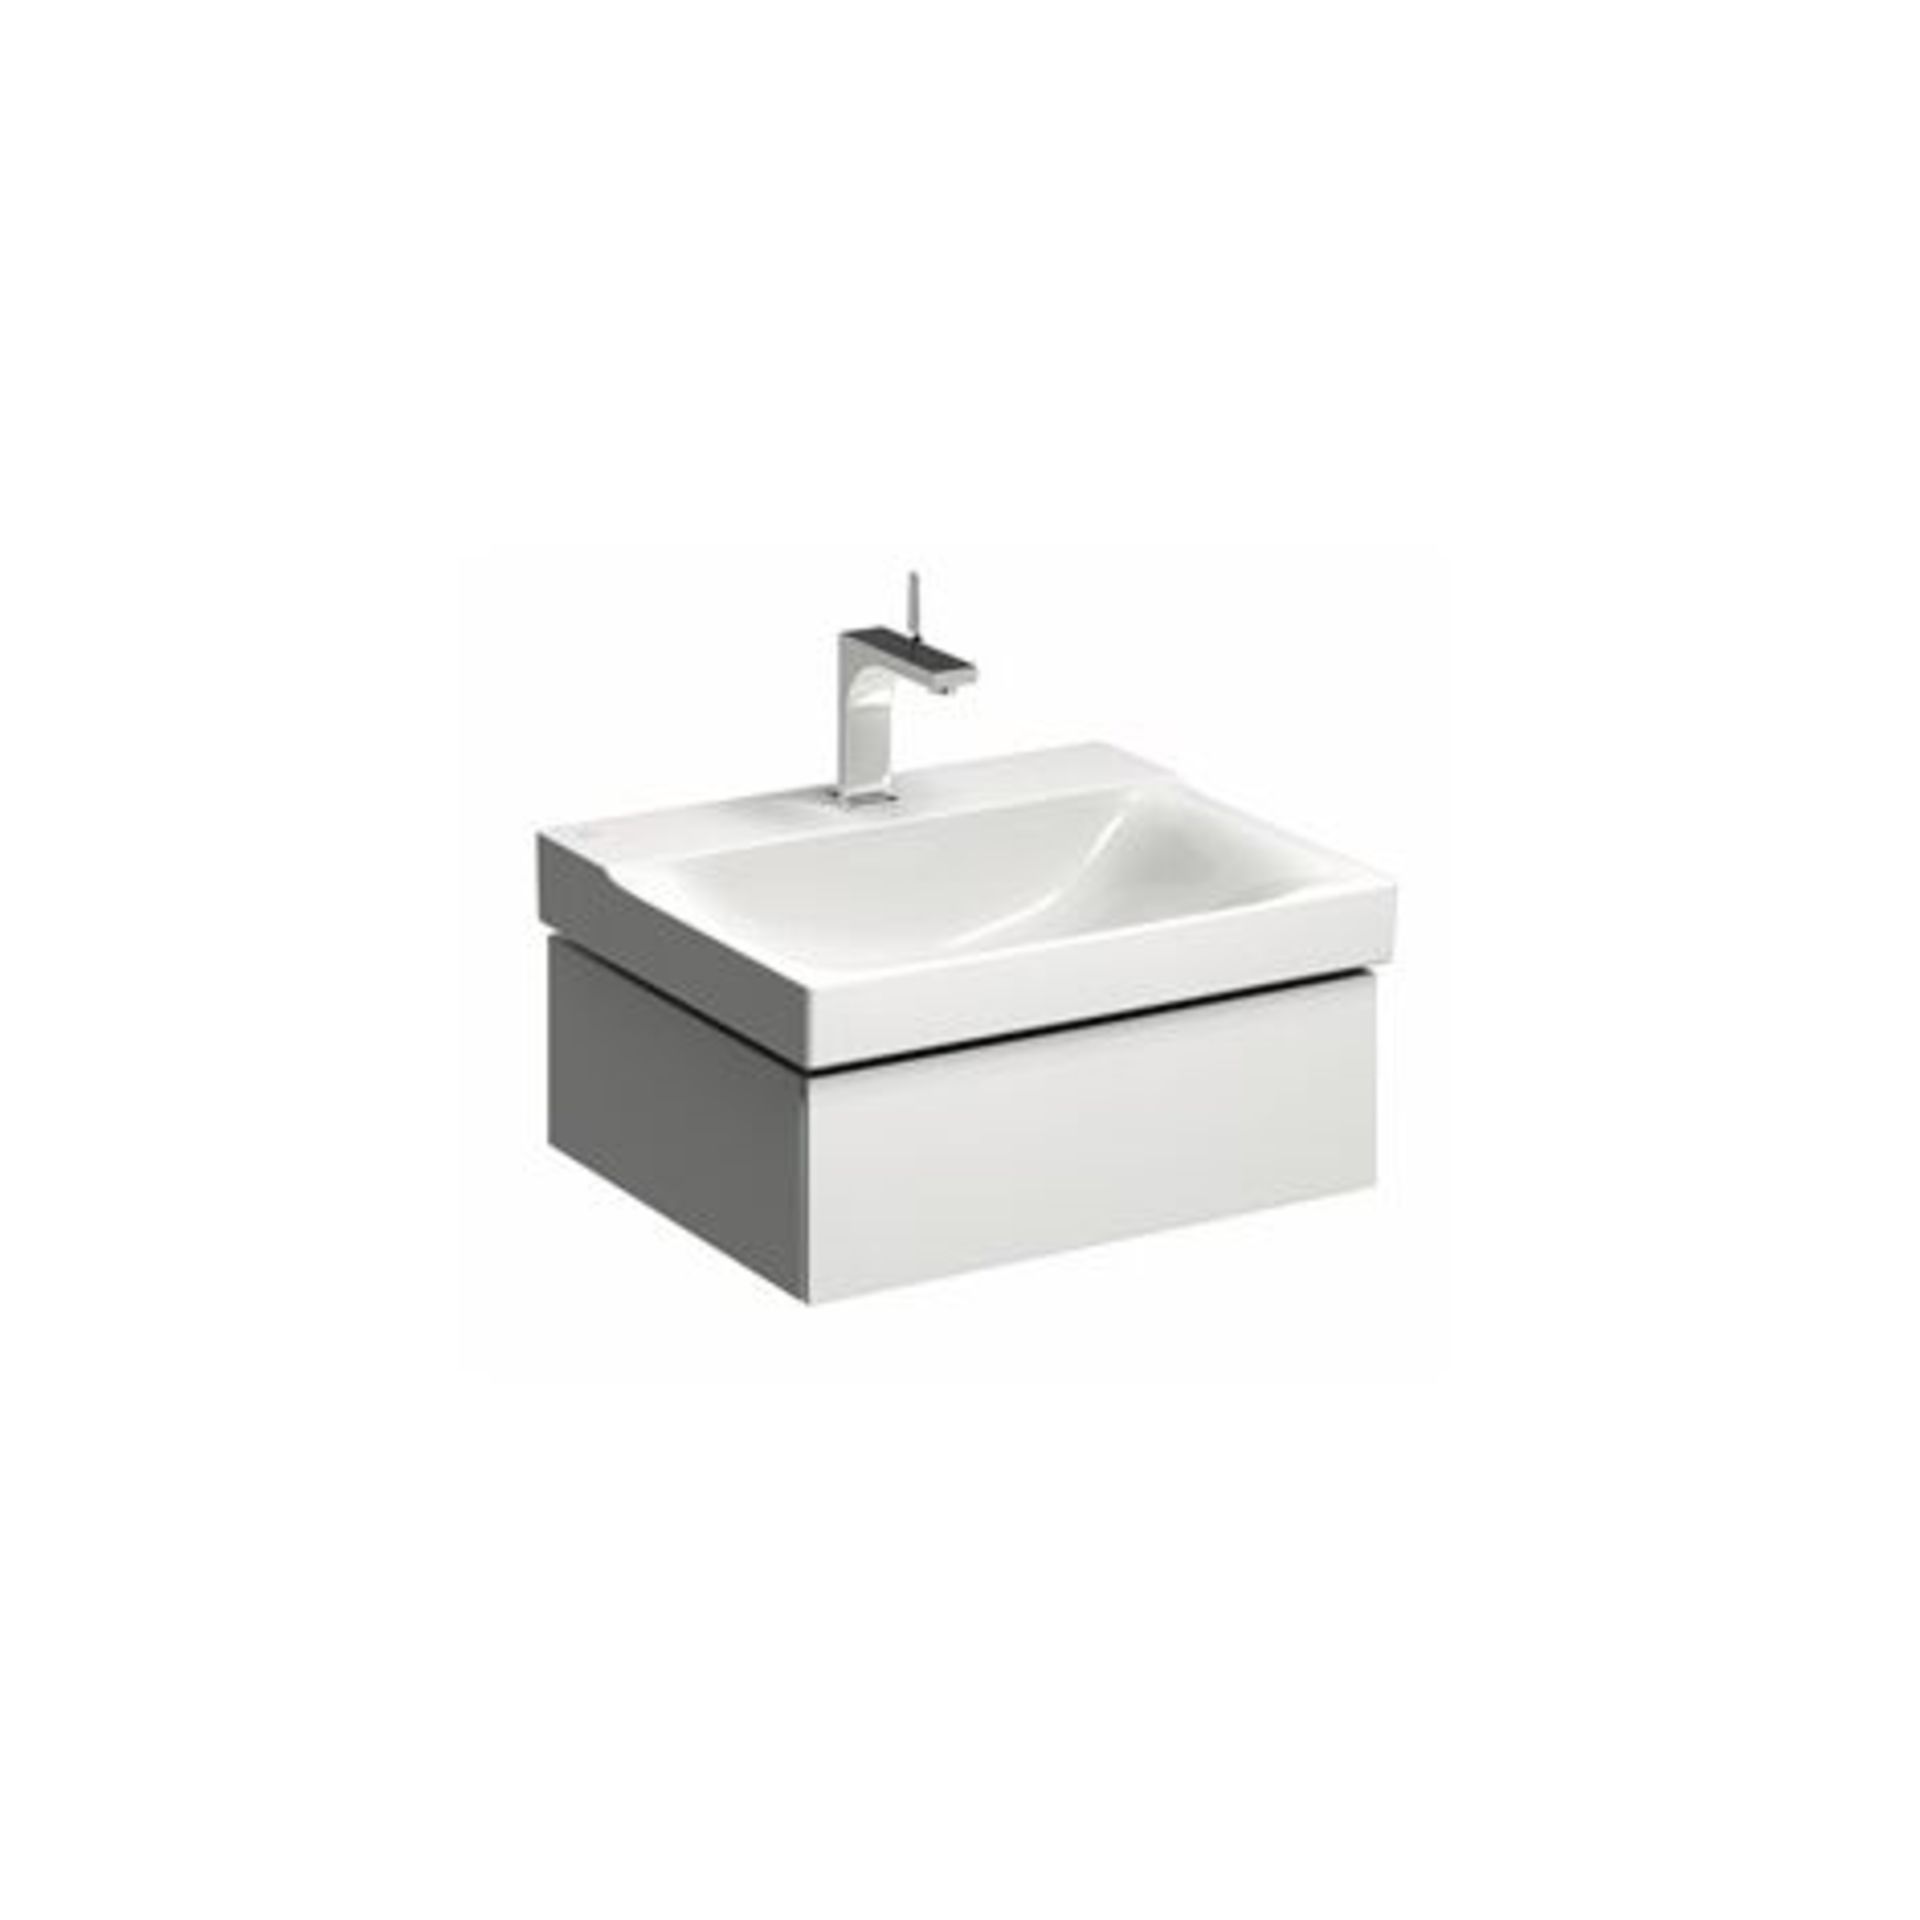 Keramag xeno 2 Vanity Unit 807160 580x220x462mm, White, High-Gloss Lacquere. RRP £422.99. - Image 2 of 2